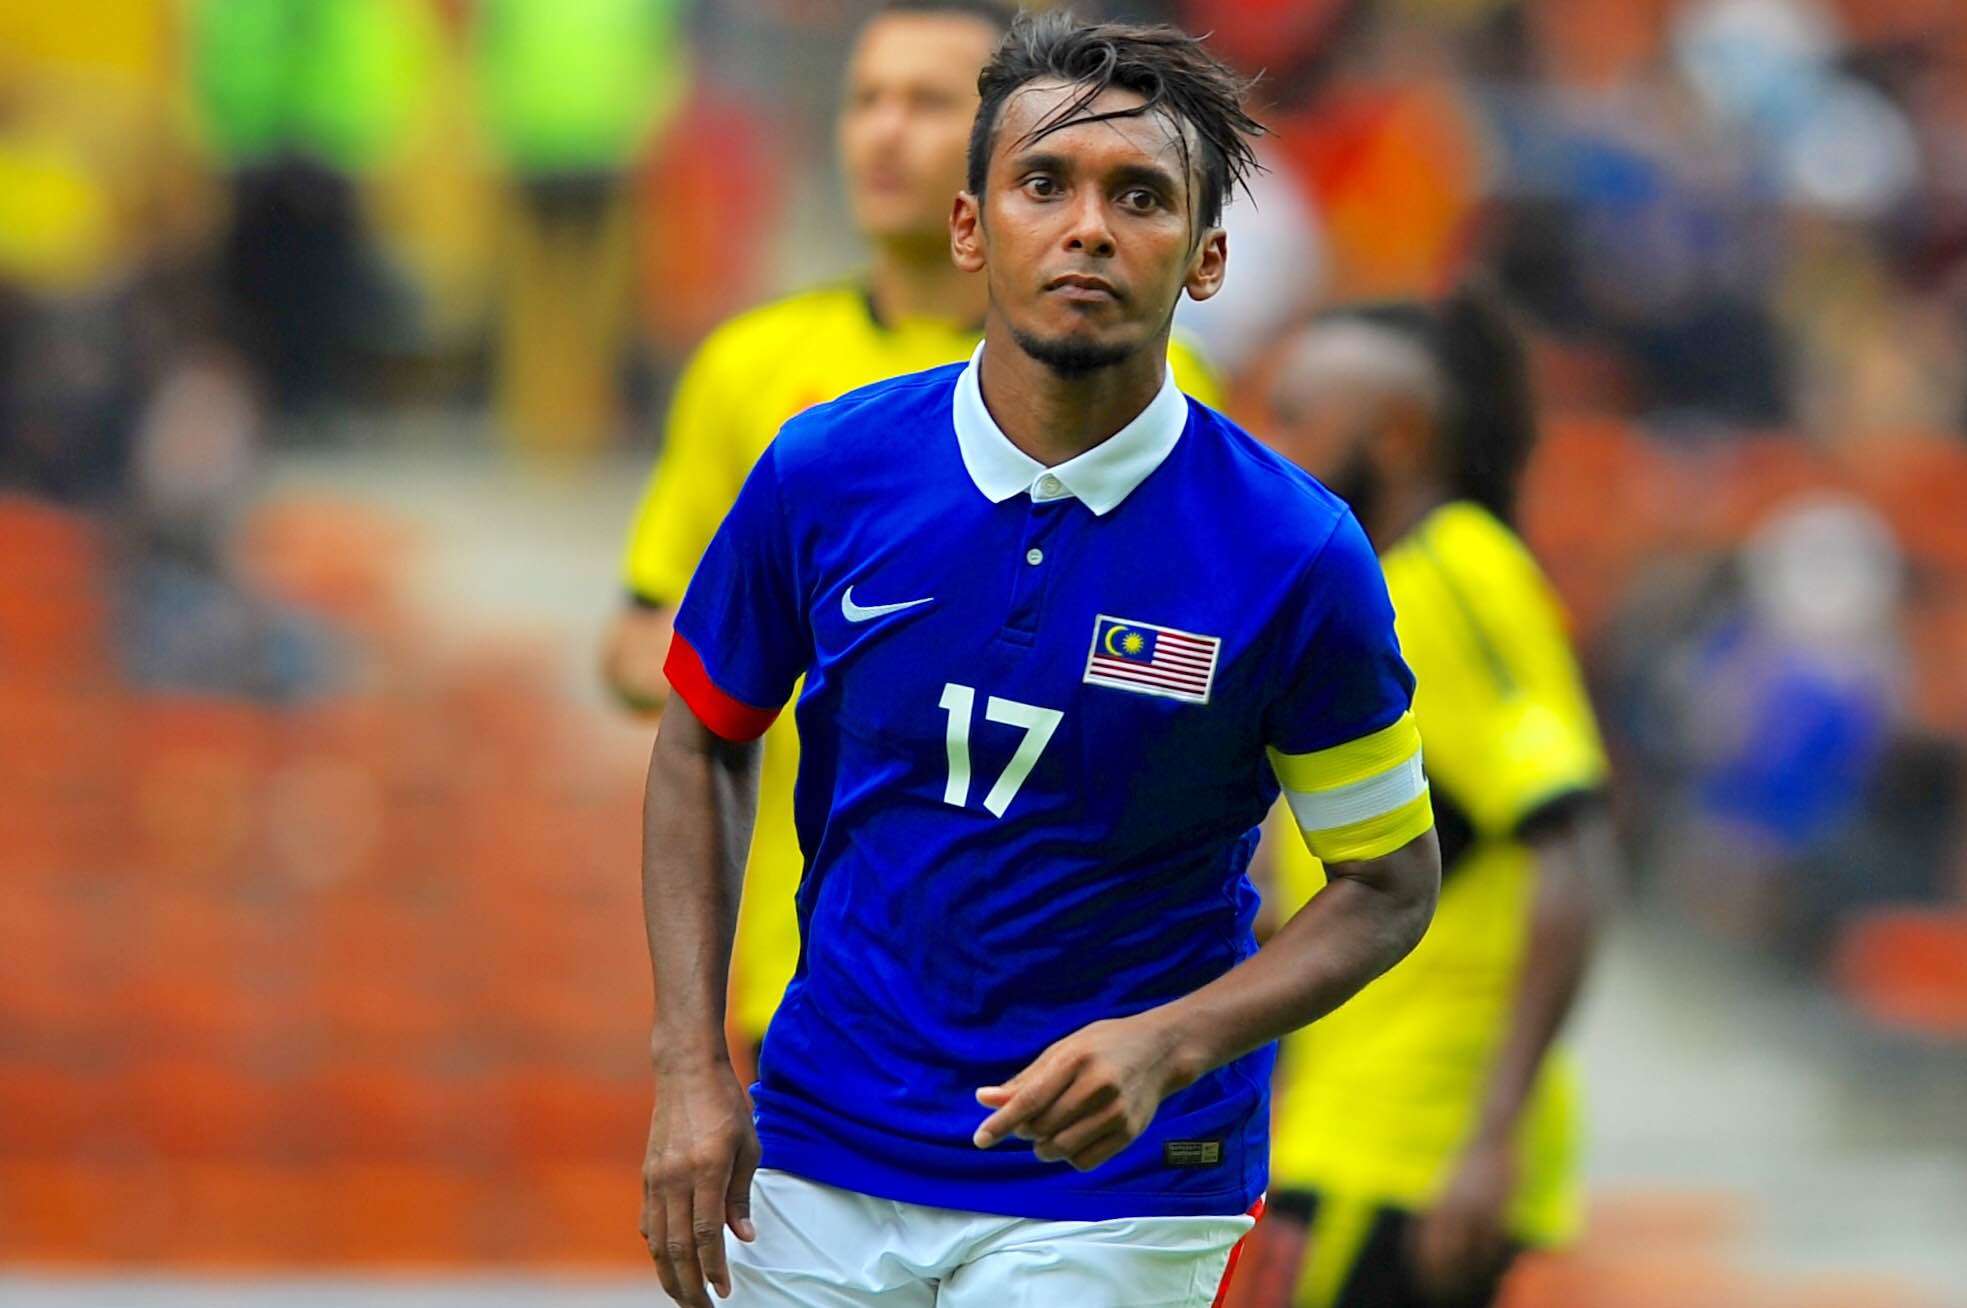 Malaysia's Amri Yahyah after scoring against Papua New Guinea 14/11/16